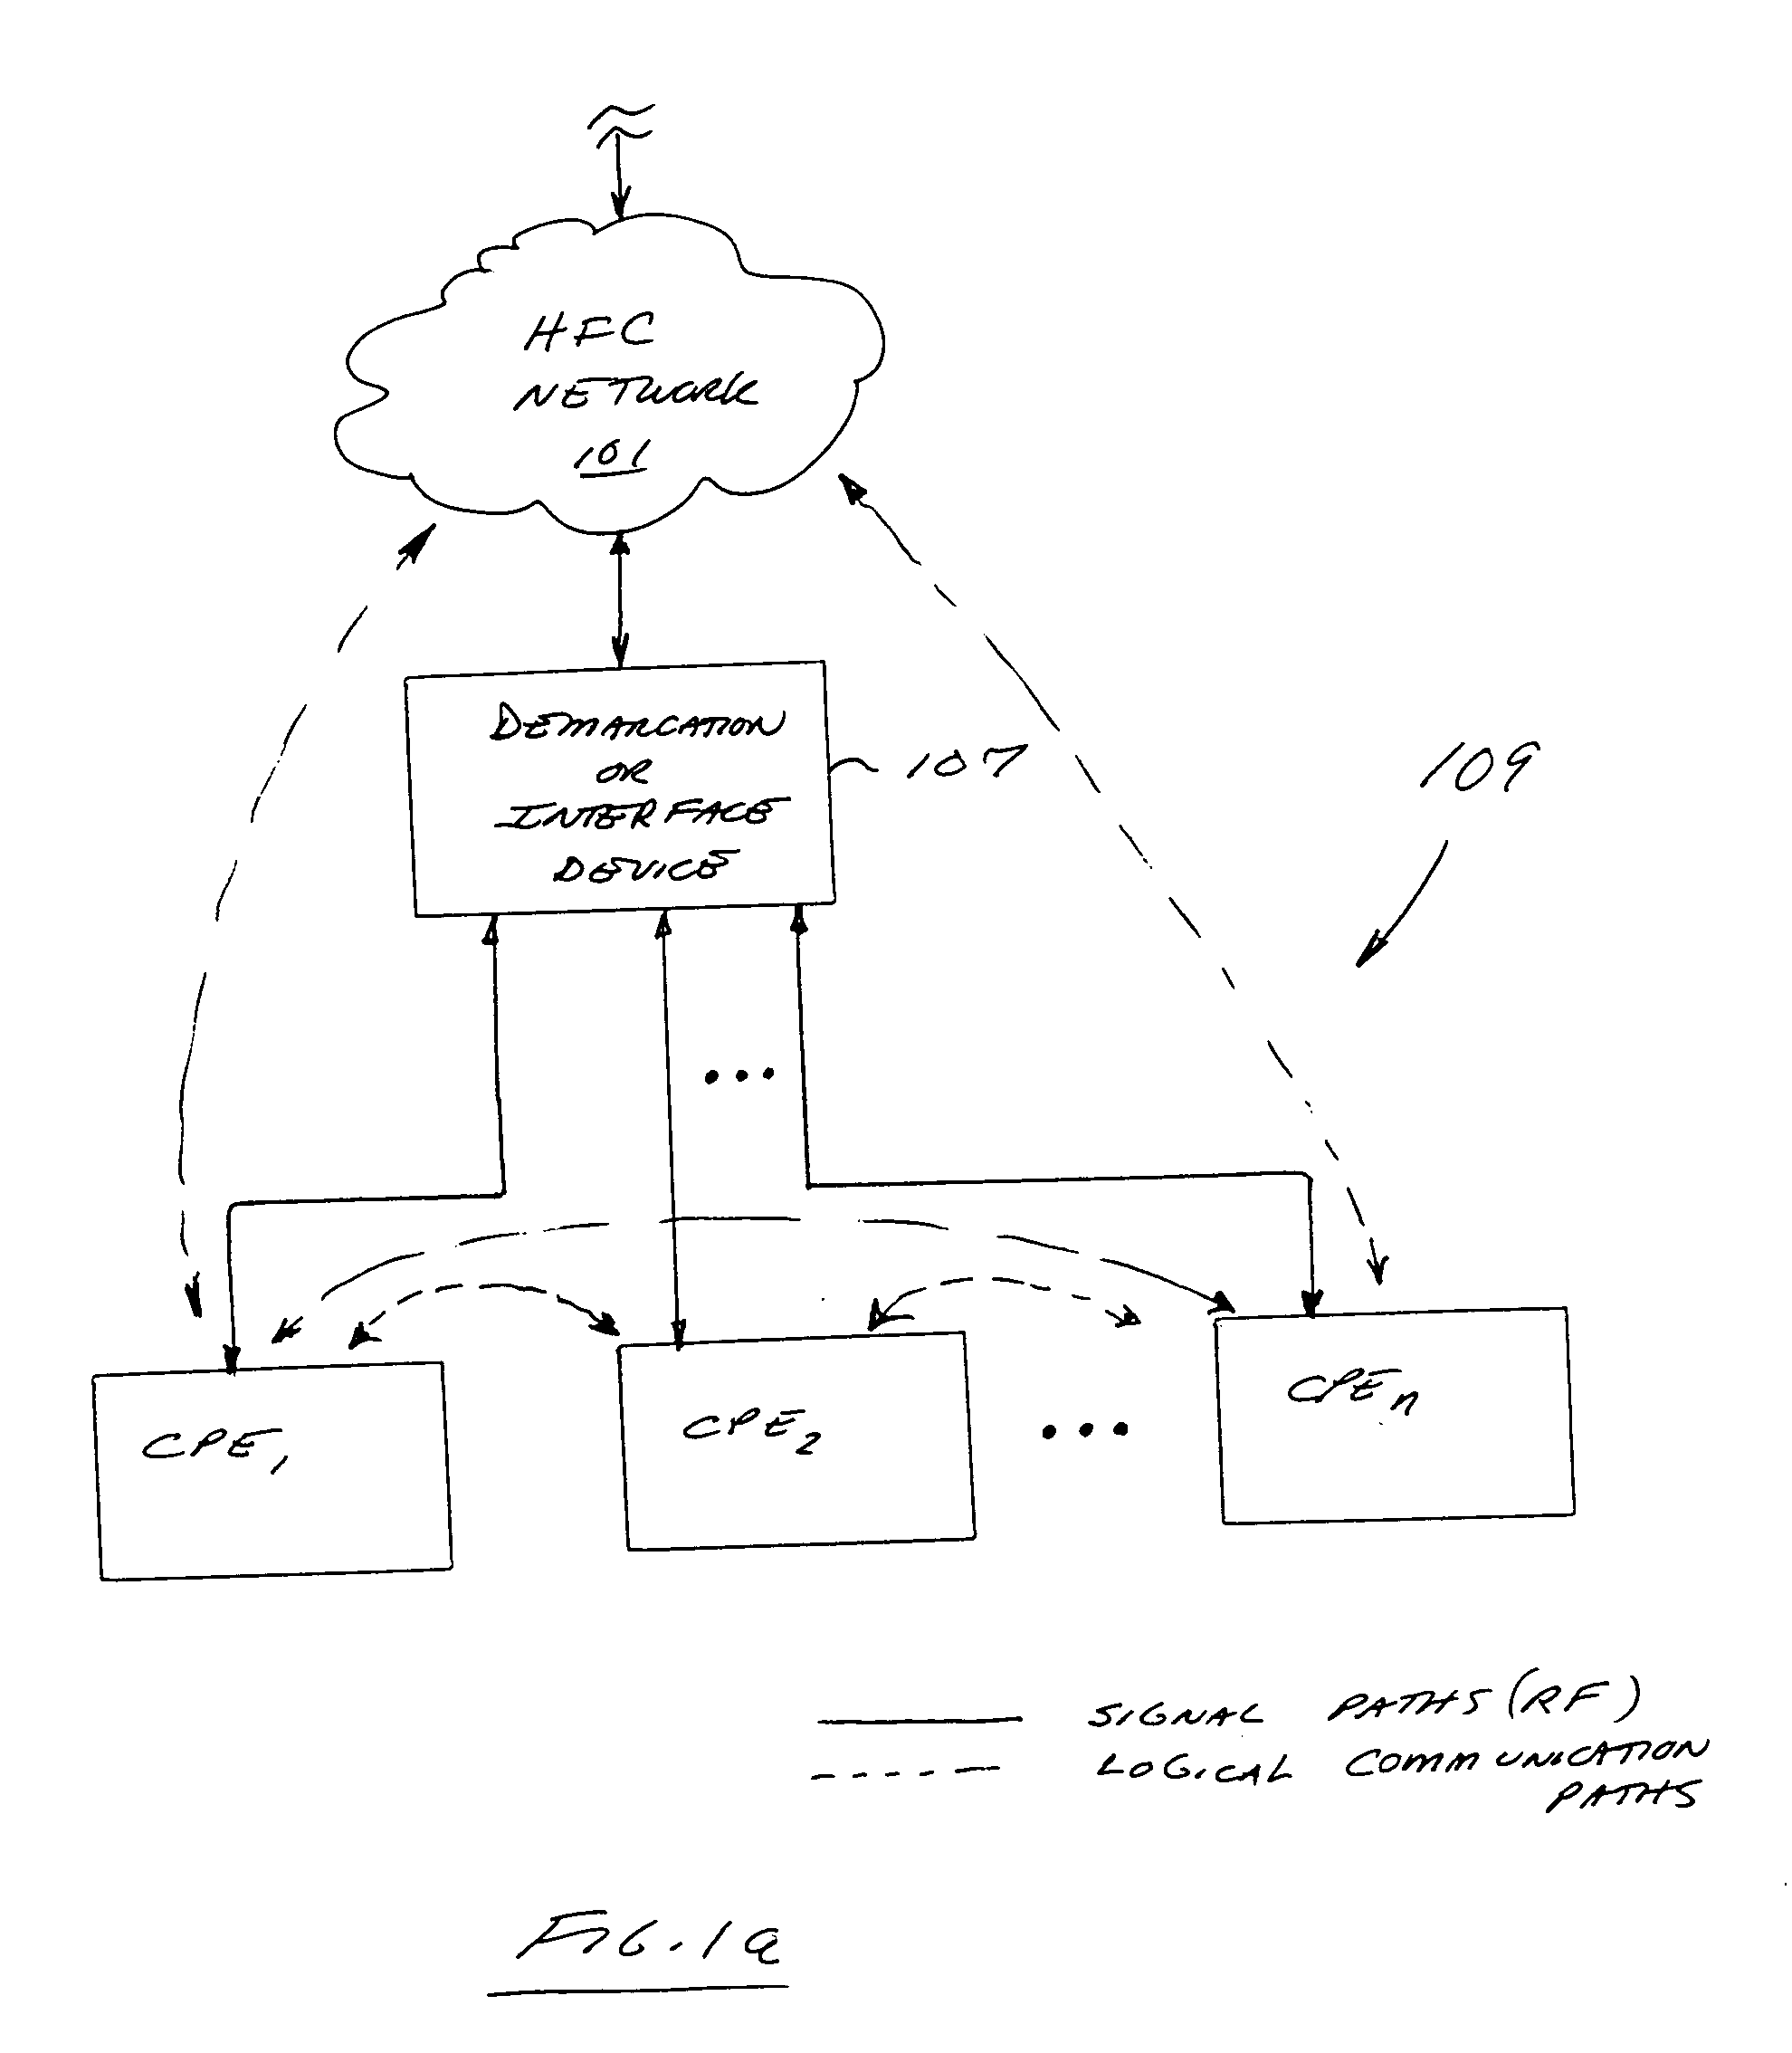 Apparatus and methods for network interface and spectrum management